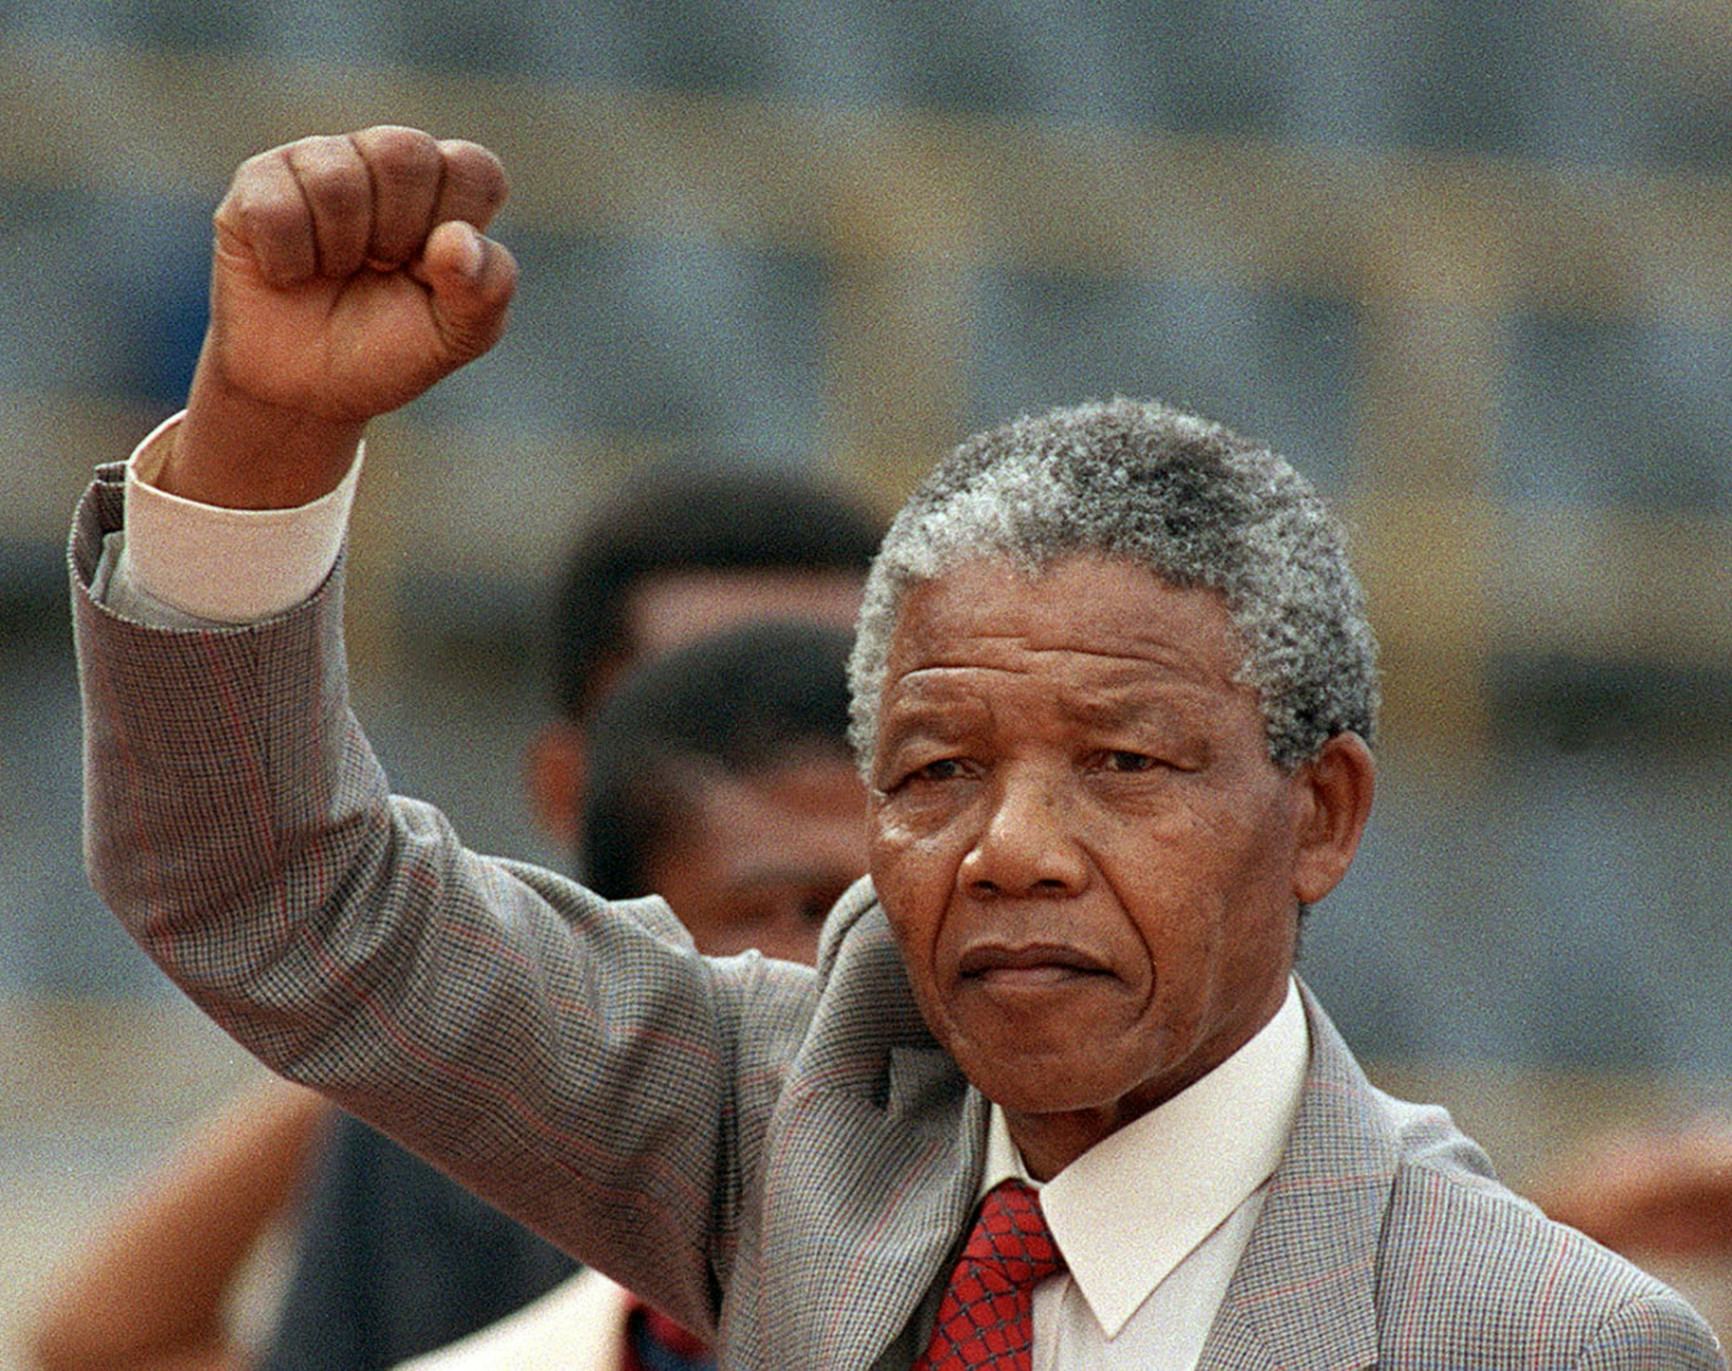 More talk, less hate: Embracing dialogue on Nelson Mandela Int’l Day